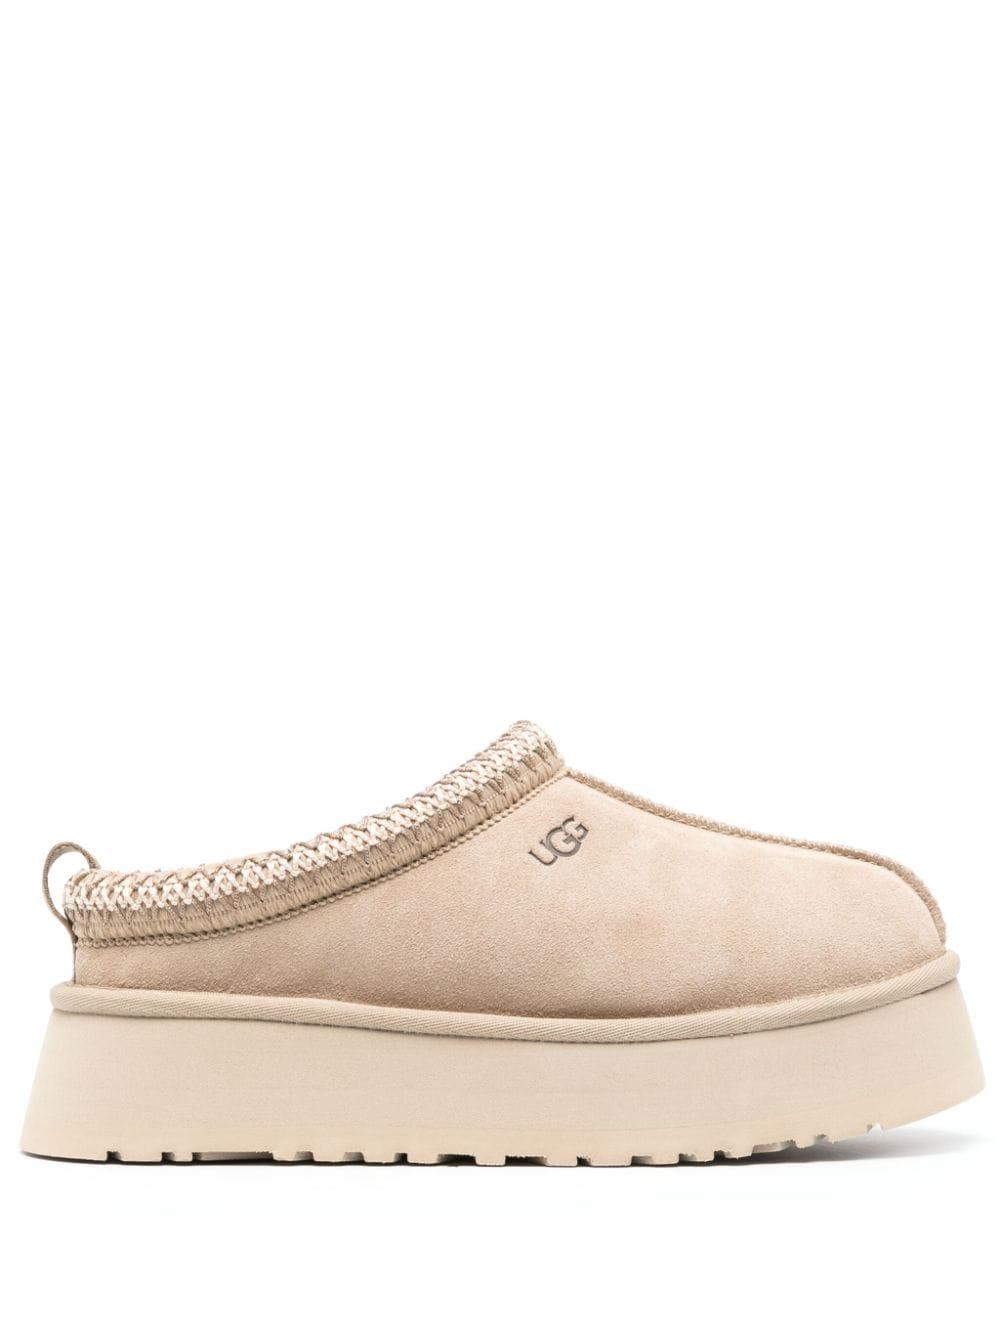 UGG Tazz Suede Platform Slippers in Natural | Lyst